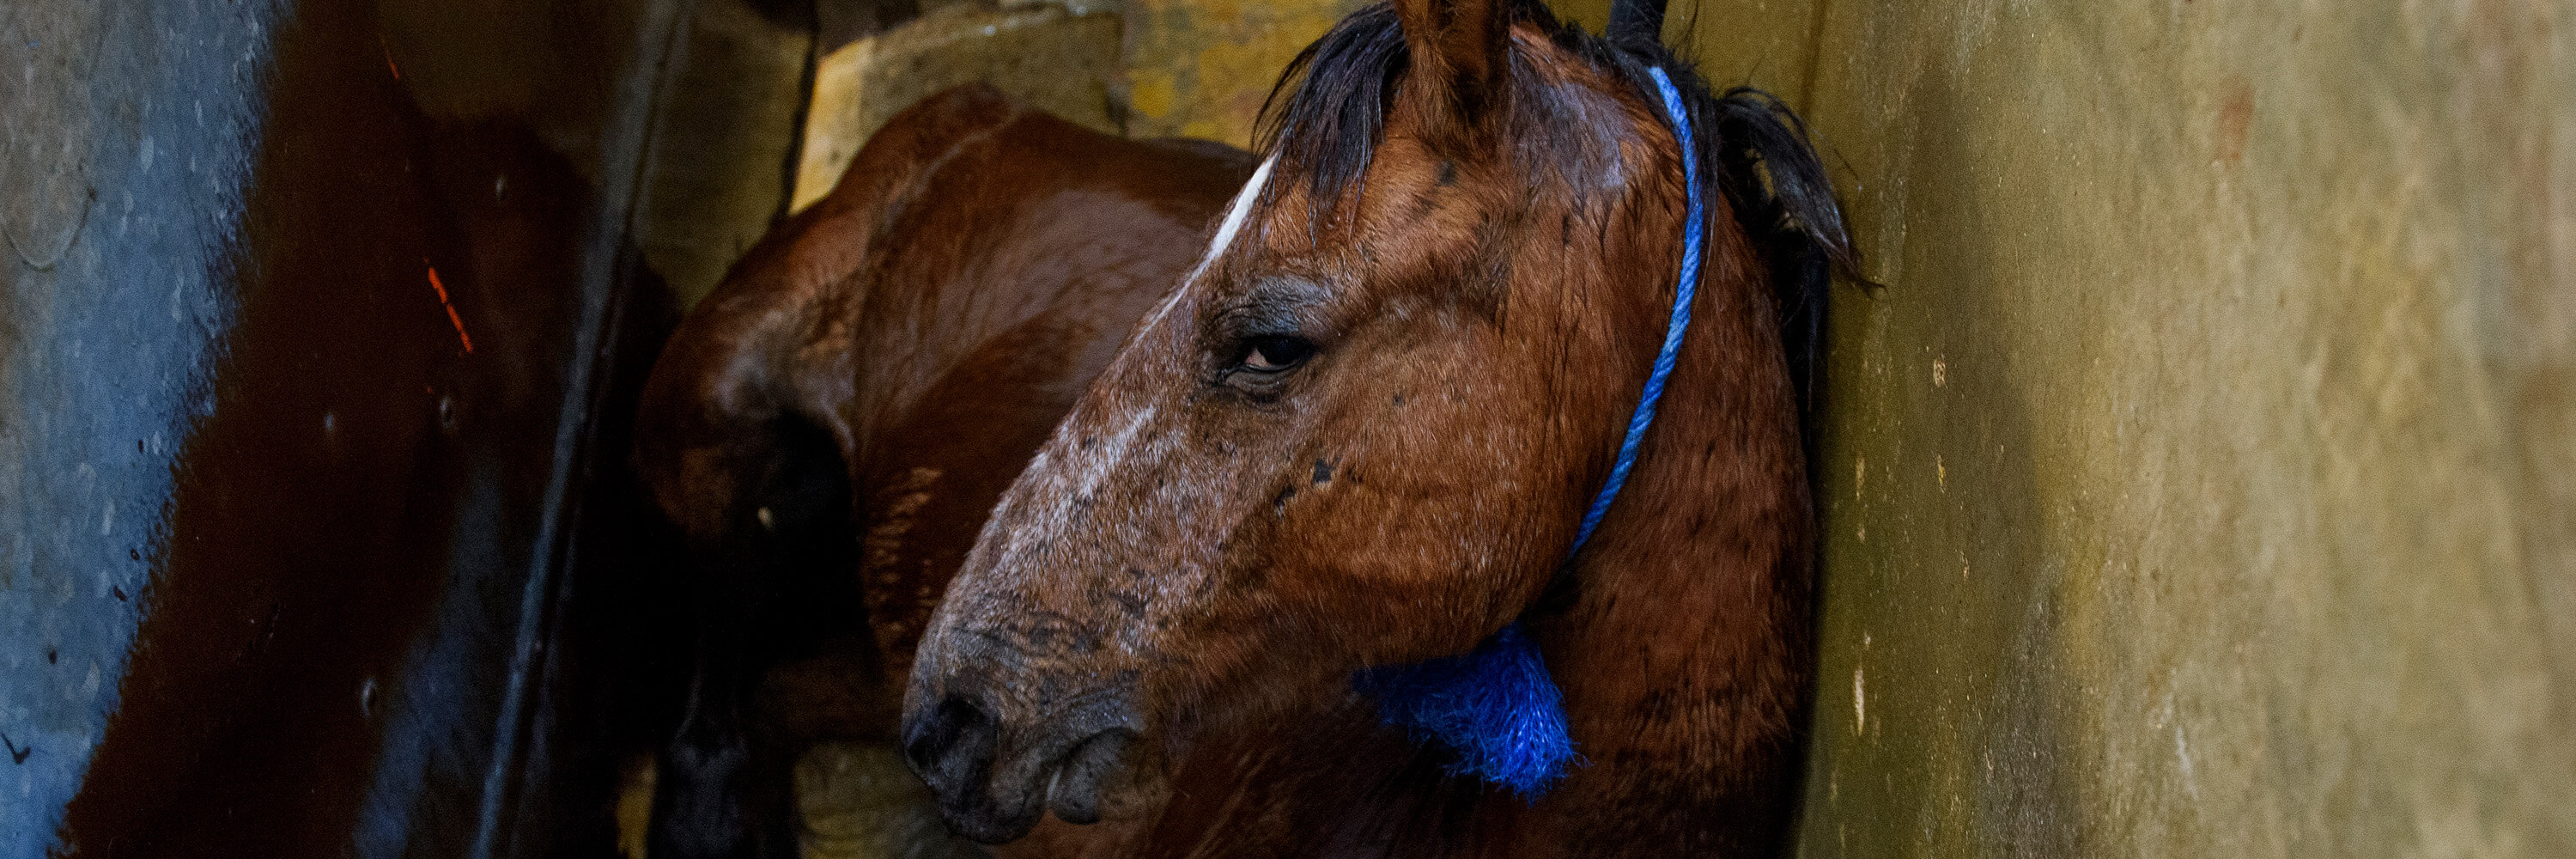 A horse with rope around his neck in a horse slaughterhouse